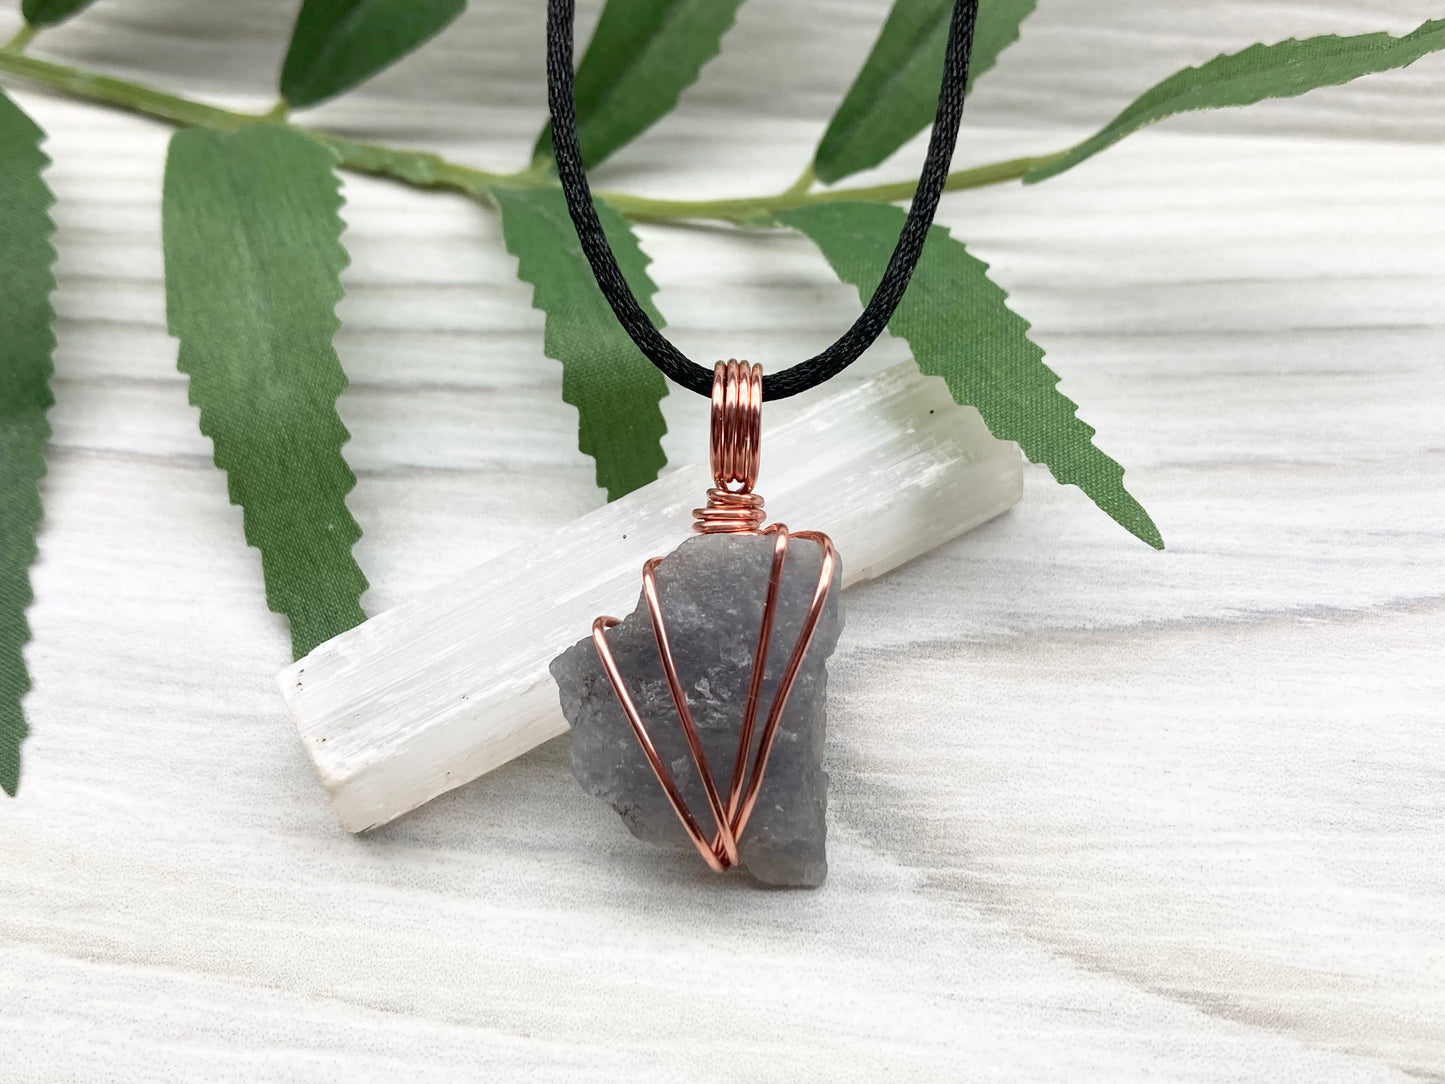 Raw Iolite Necklace. Natural Iolite Crystal Wrapped With Pure Copper Wire.This Stone Is A Blue Purple Color. Comes On A Black Chain. New Age Sagittarius Pendant.